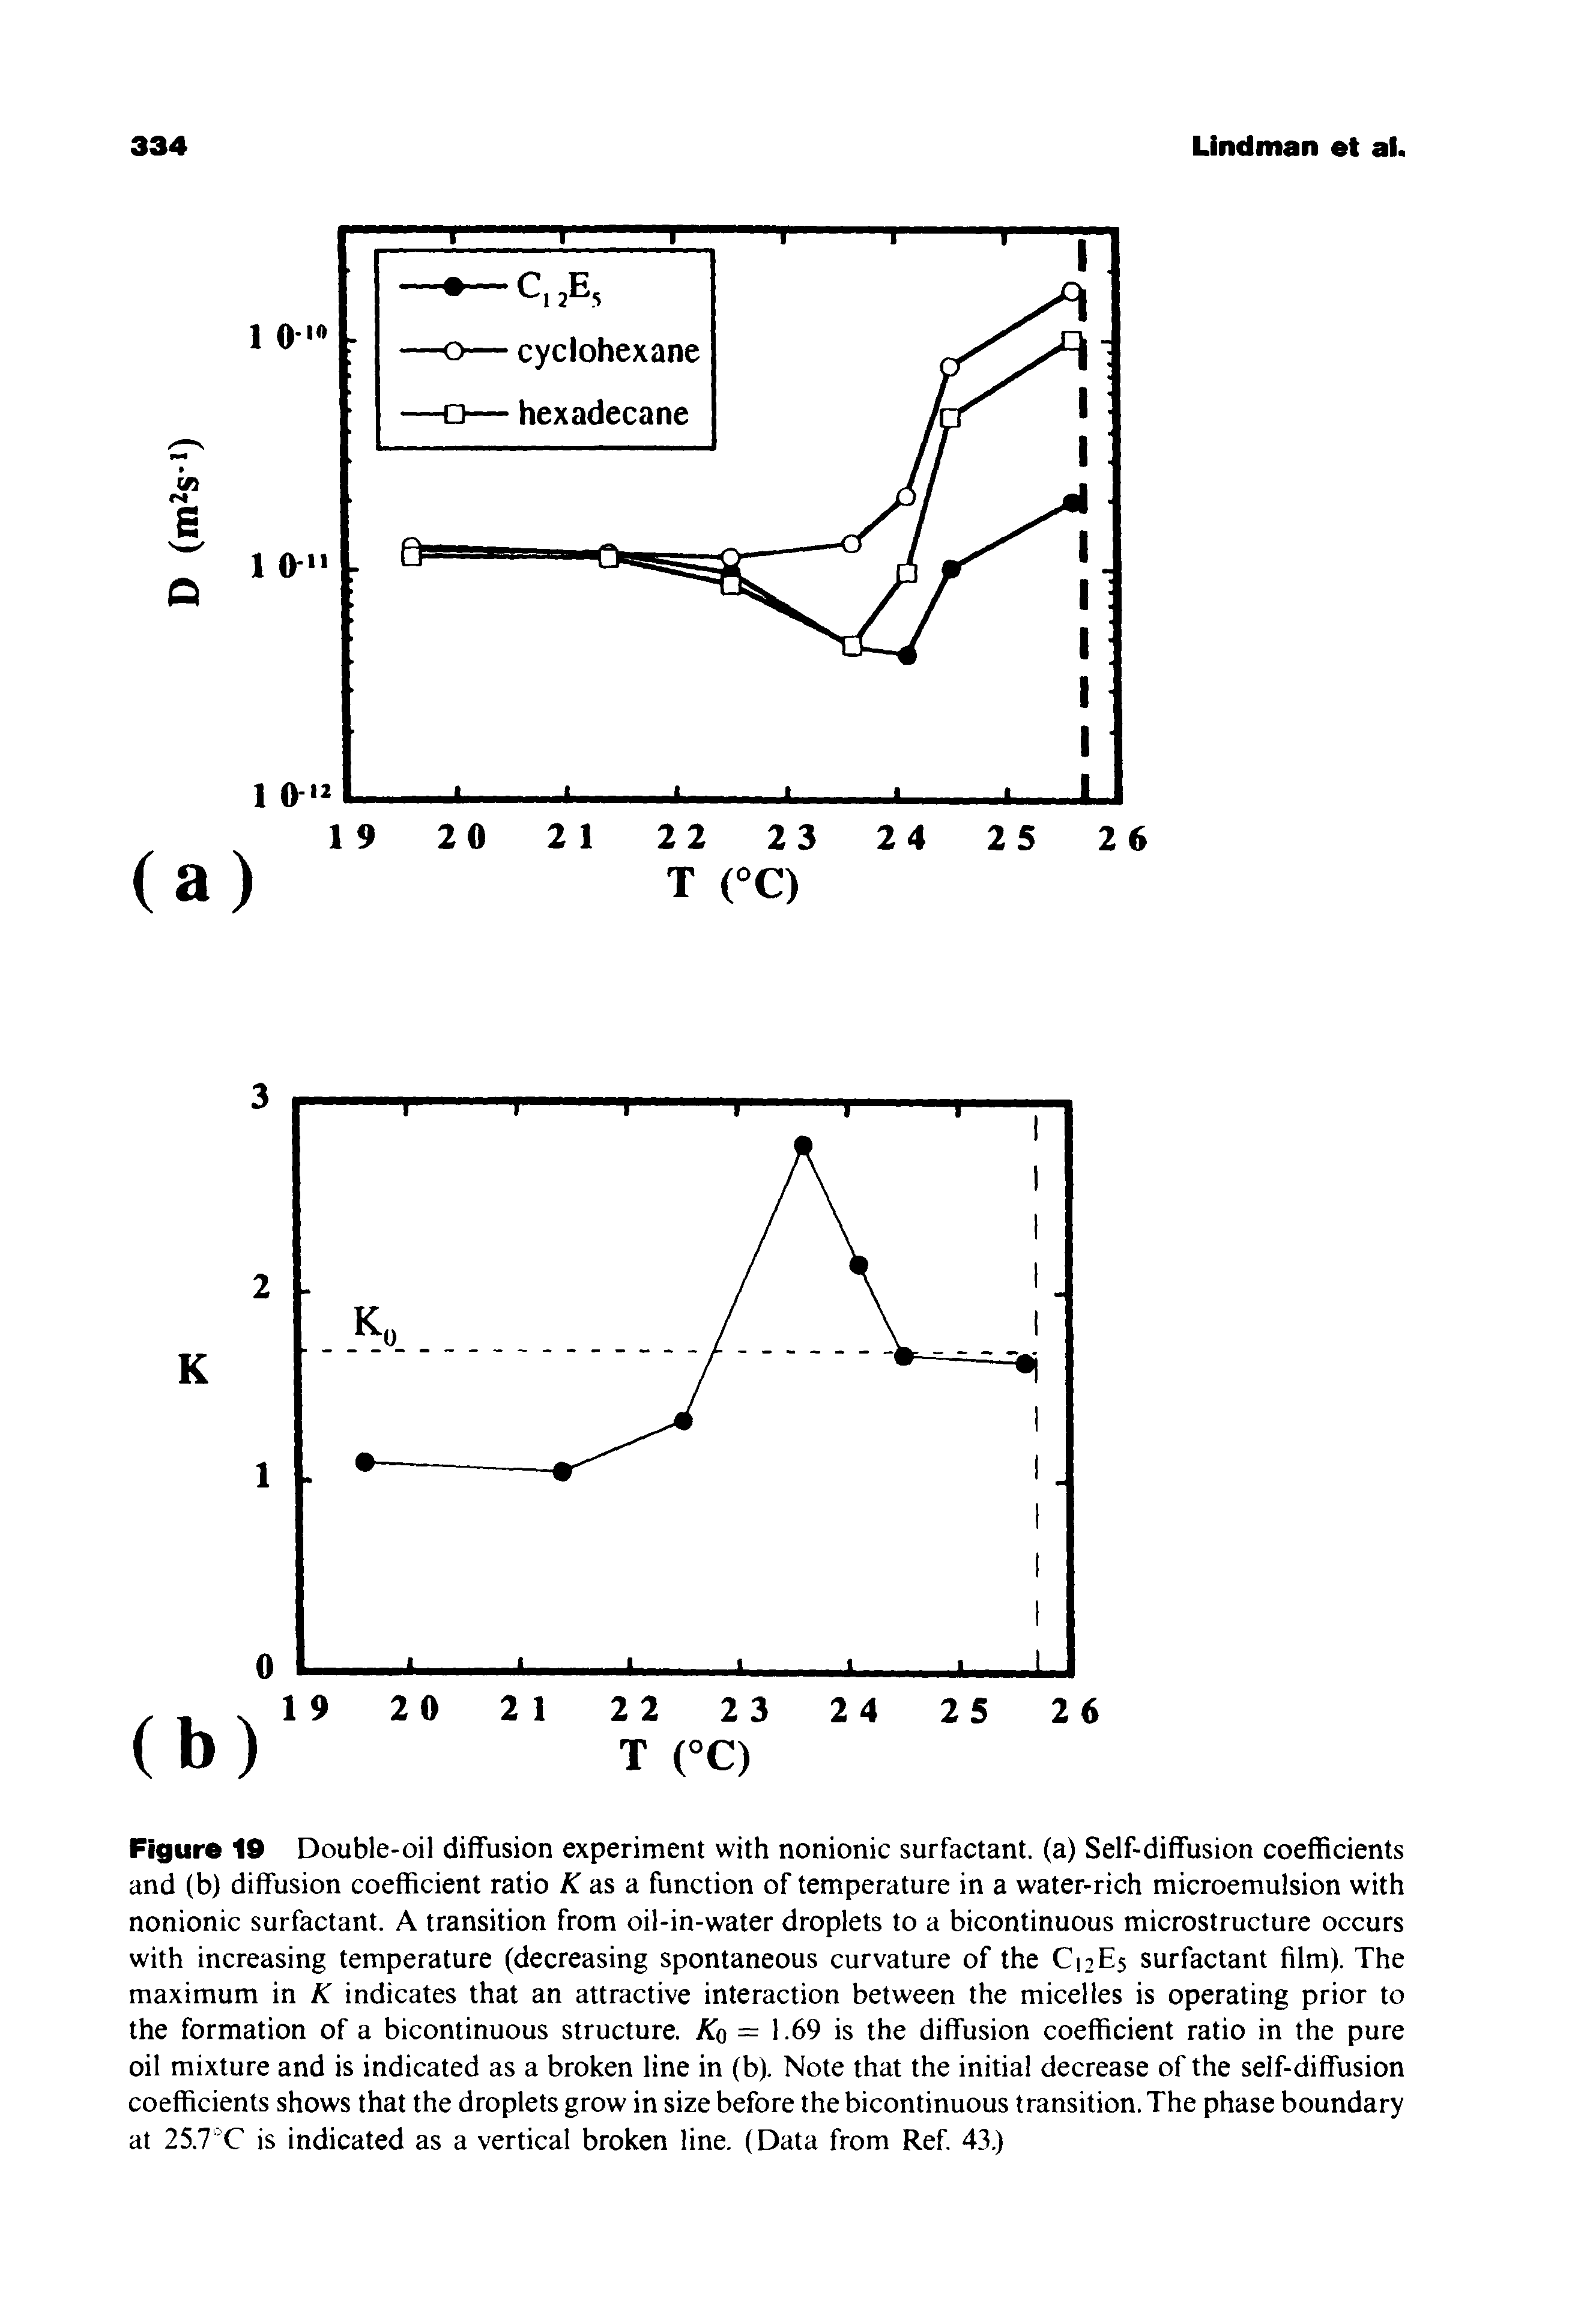 Figure 19 Double-oil diffusion experiment with nonionic surfactant, (a) Self-diffusion coefficients and (b) diffusion coefficient ratio A" as a function of temperature in a water-rich microemulsion with nonionic surfactant. A transition from oil-in-water droplets to a bicontinuous microstructure occurs with increasing temperature (decreasing spontaneous curvature of the C12E5 surfactant film). The maximum in K indicates that an attractive interaction between the micelles is operating prior to the formation of a bicontinuous structure. Kq = 1.69 is the diffusion coefficient ratio in the pure oil mixture and is indicated as a broken line in (b). Note that the initial decrease of the self-diffusion coefficients shows that the droplets grow in size before the bicontinuous transition. The phase boundary at 25.7 C is indicated as a vertical broken line. (Data from Ref 43.)...